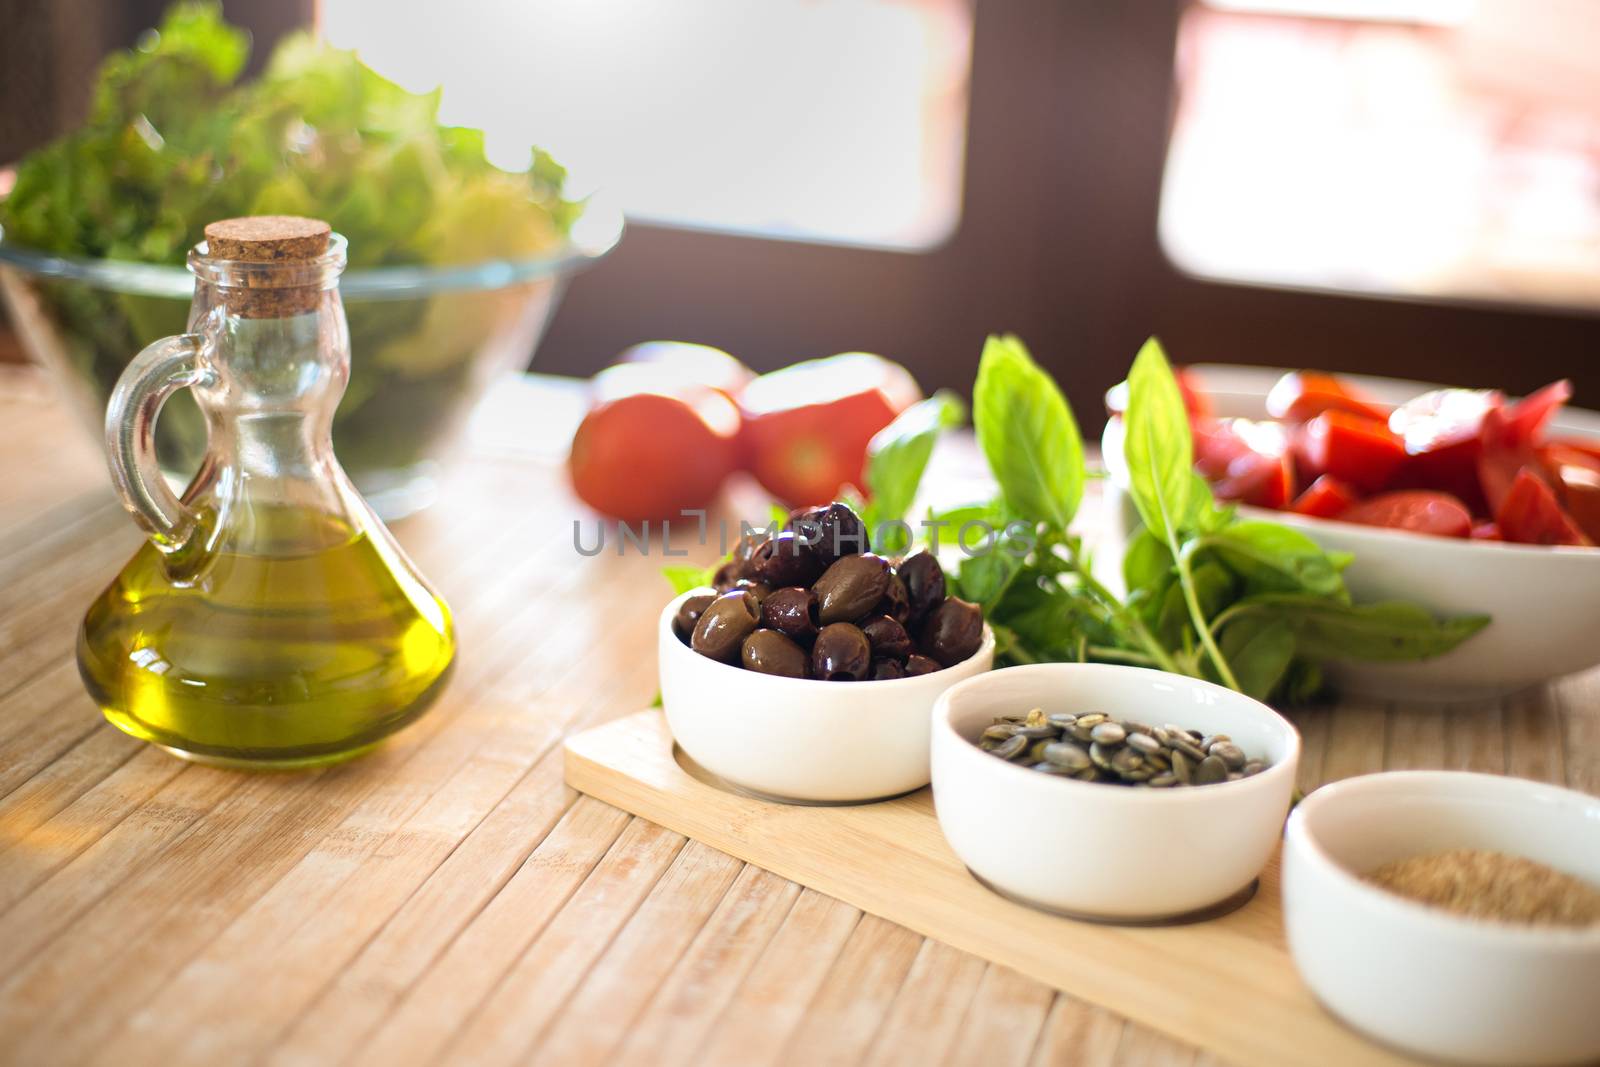 Extra virgin olive oil and olives in the foreground with fresh vegetables and sunlight in the background - Mediterranean diet concept - Healthy summer food concept